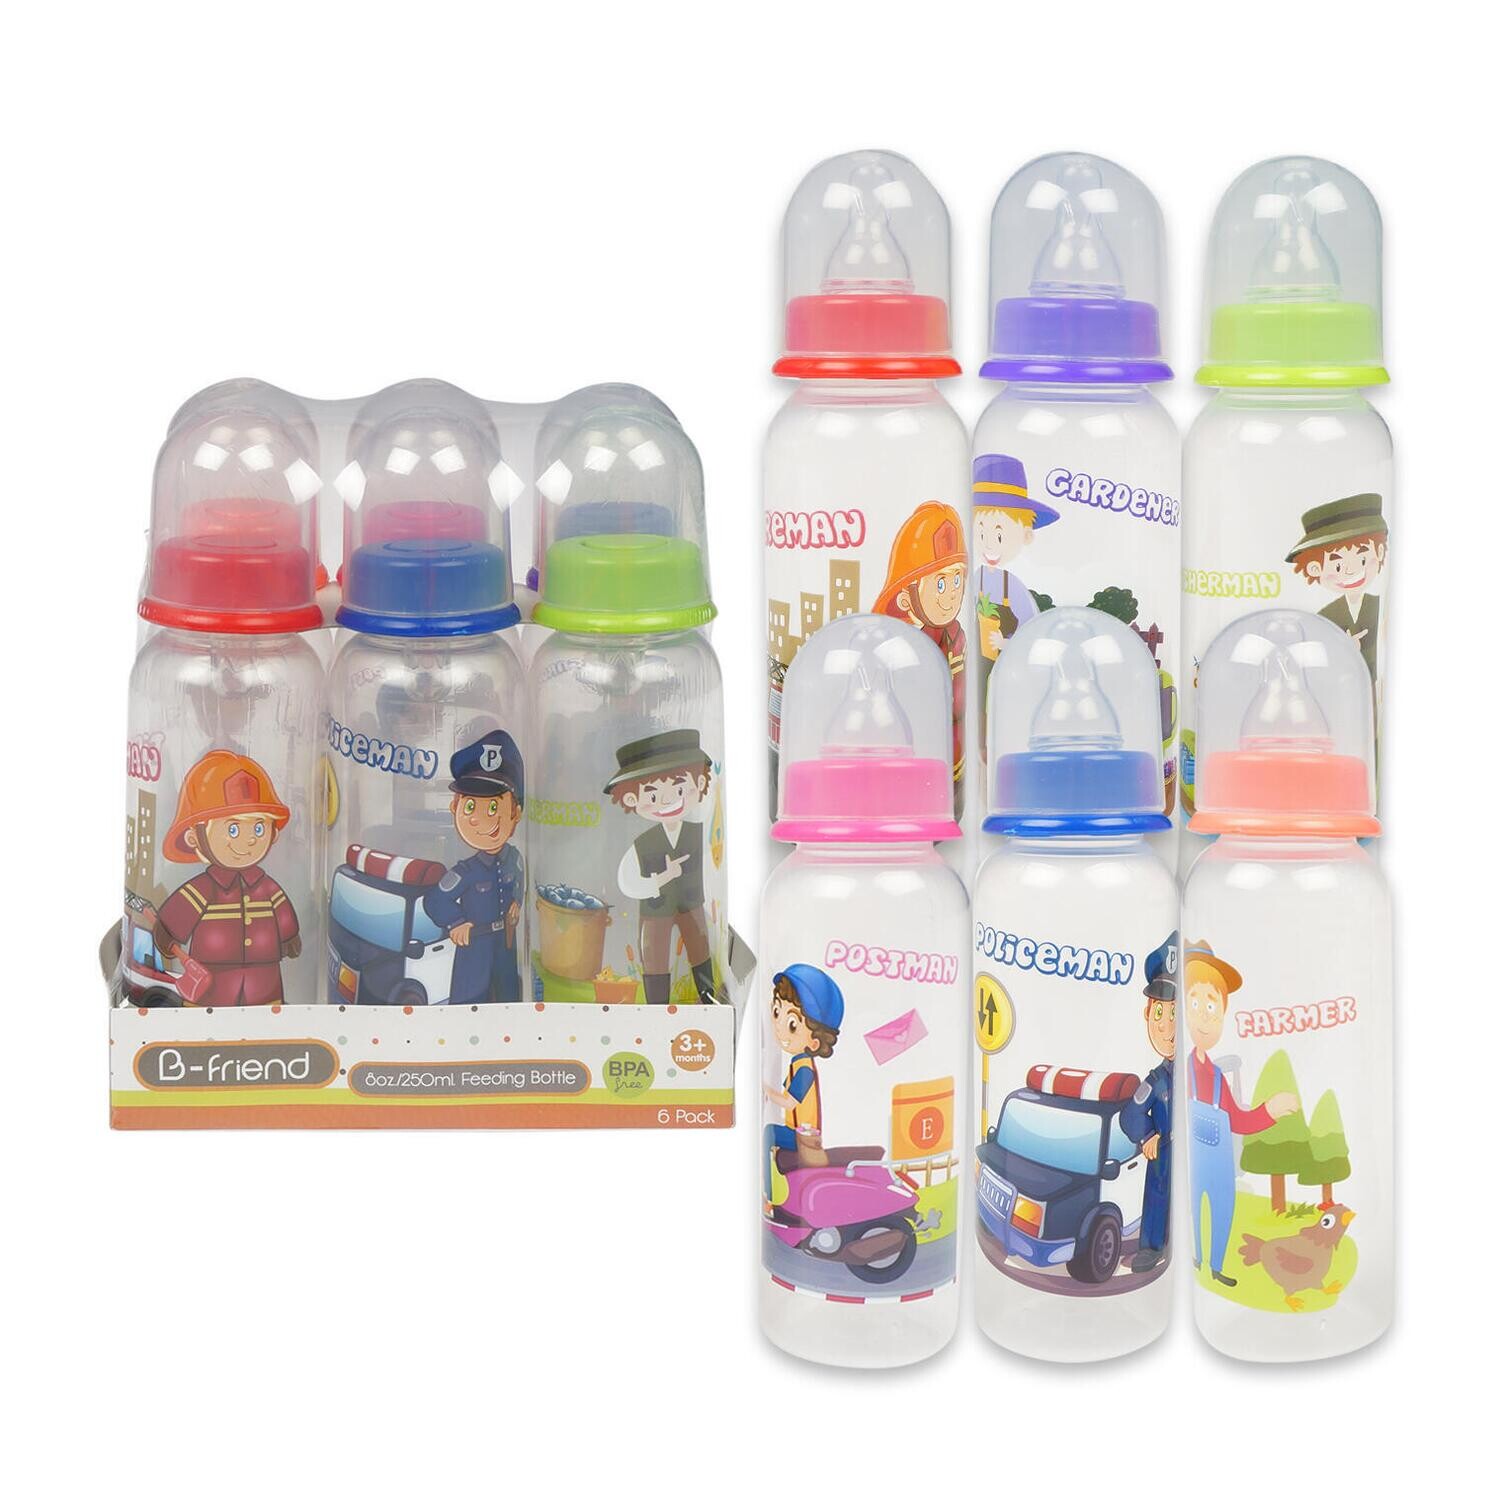 . Case of [12] Baby Bottle with Silicone - Everyday Heroes, 8 oz .